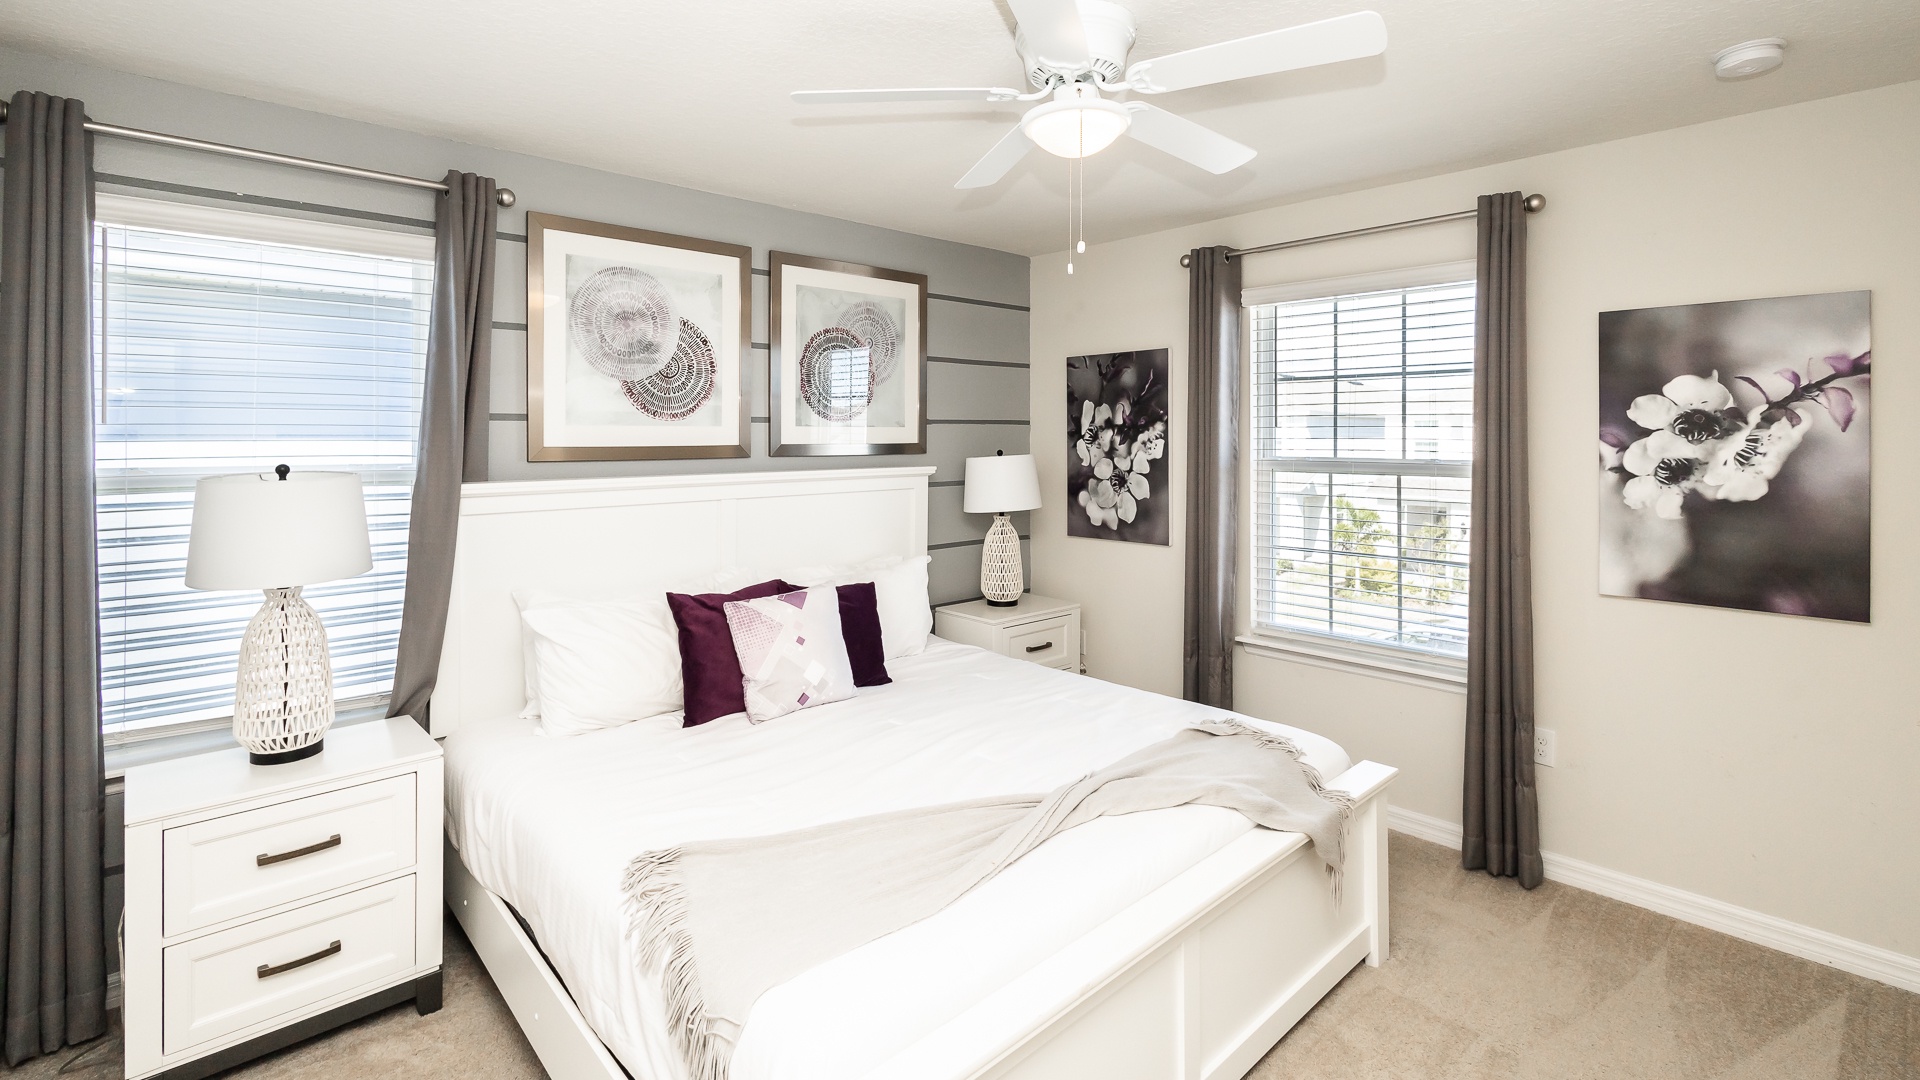 This chic 2nd floor king suite offers a private en suite, Smart TV, & ceiling fan